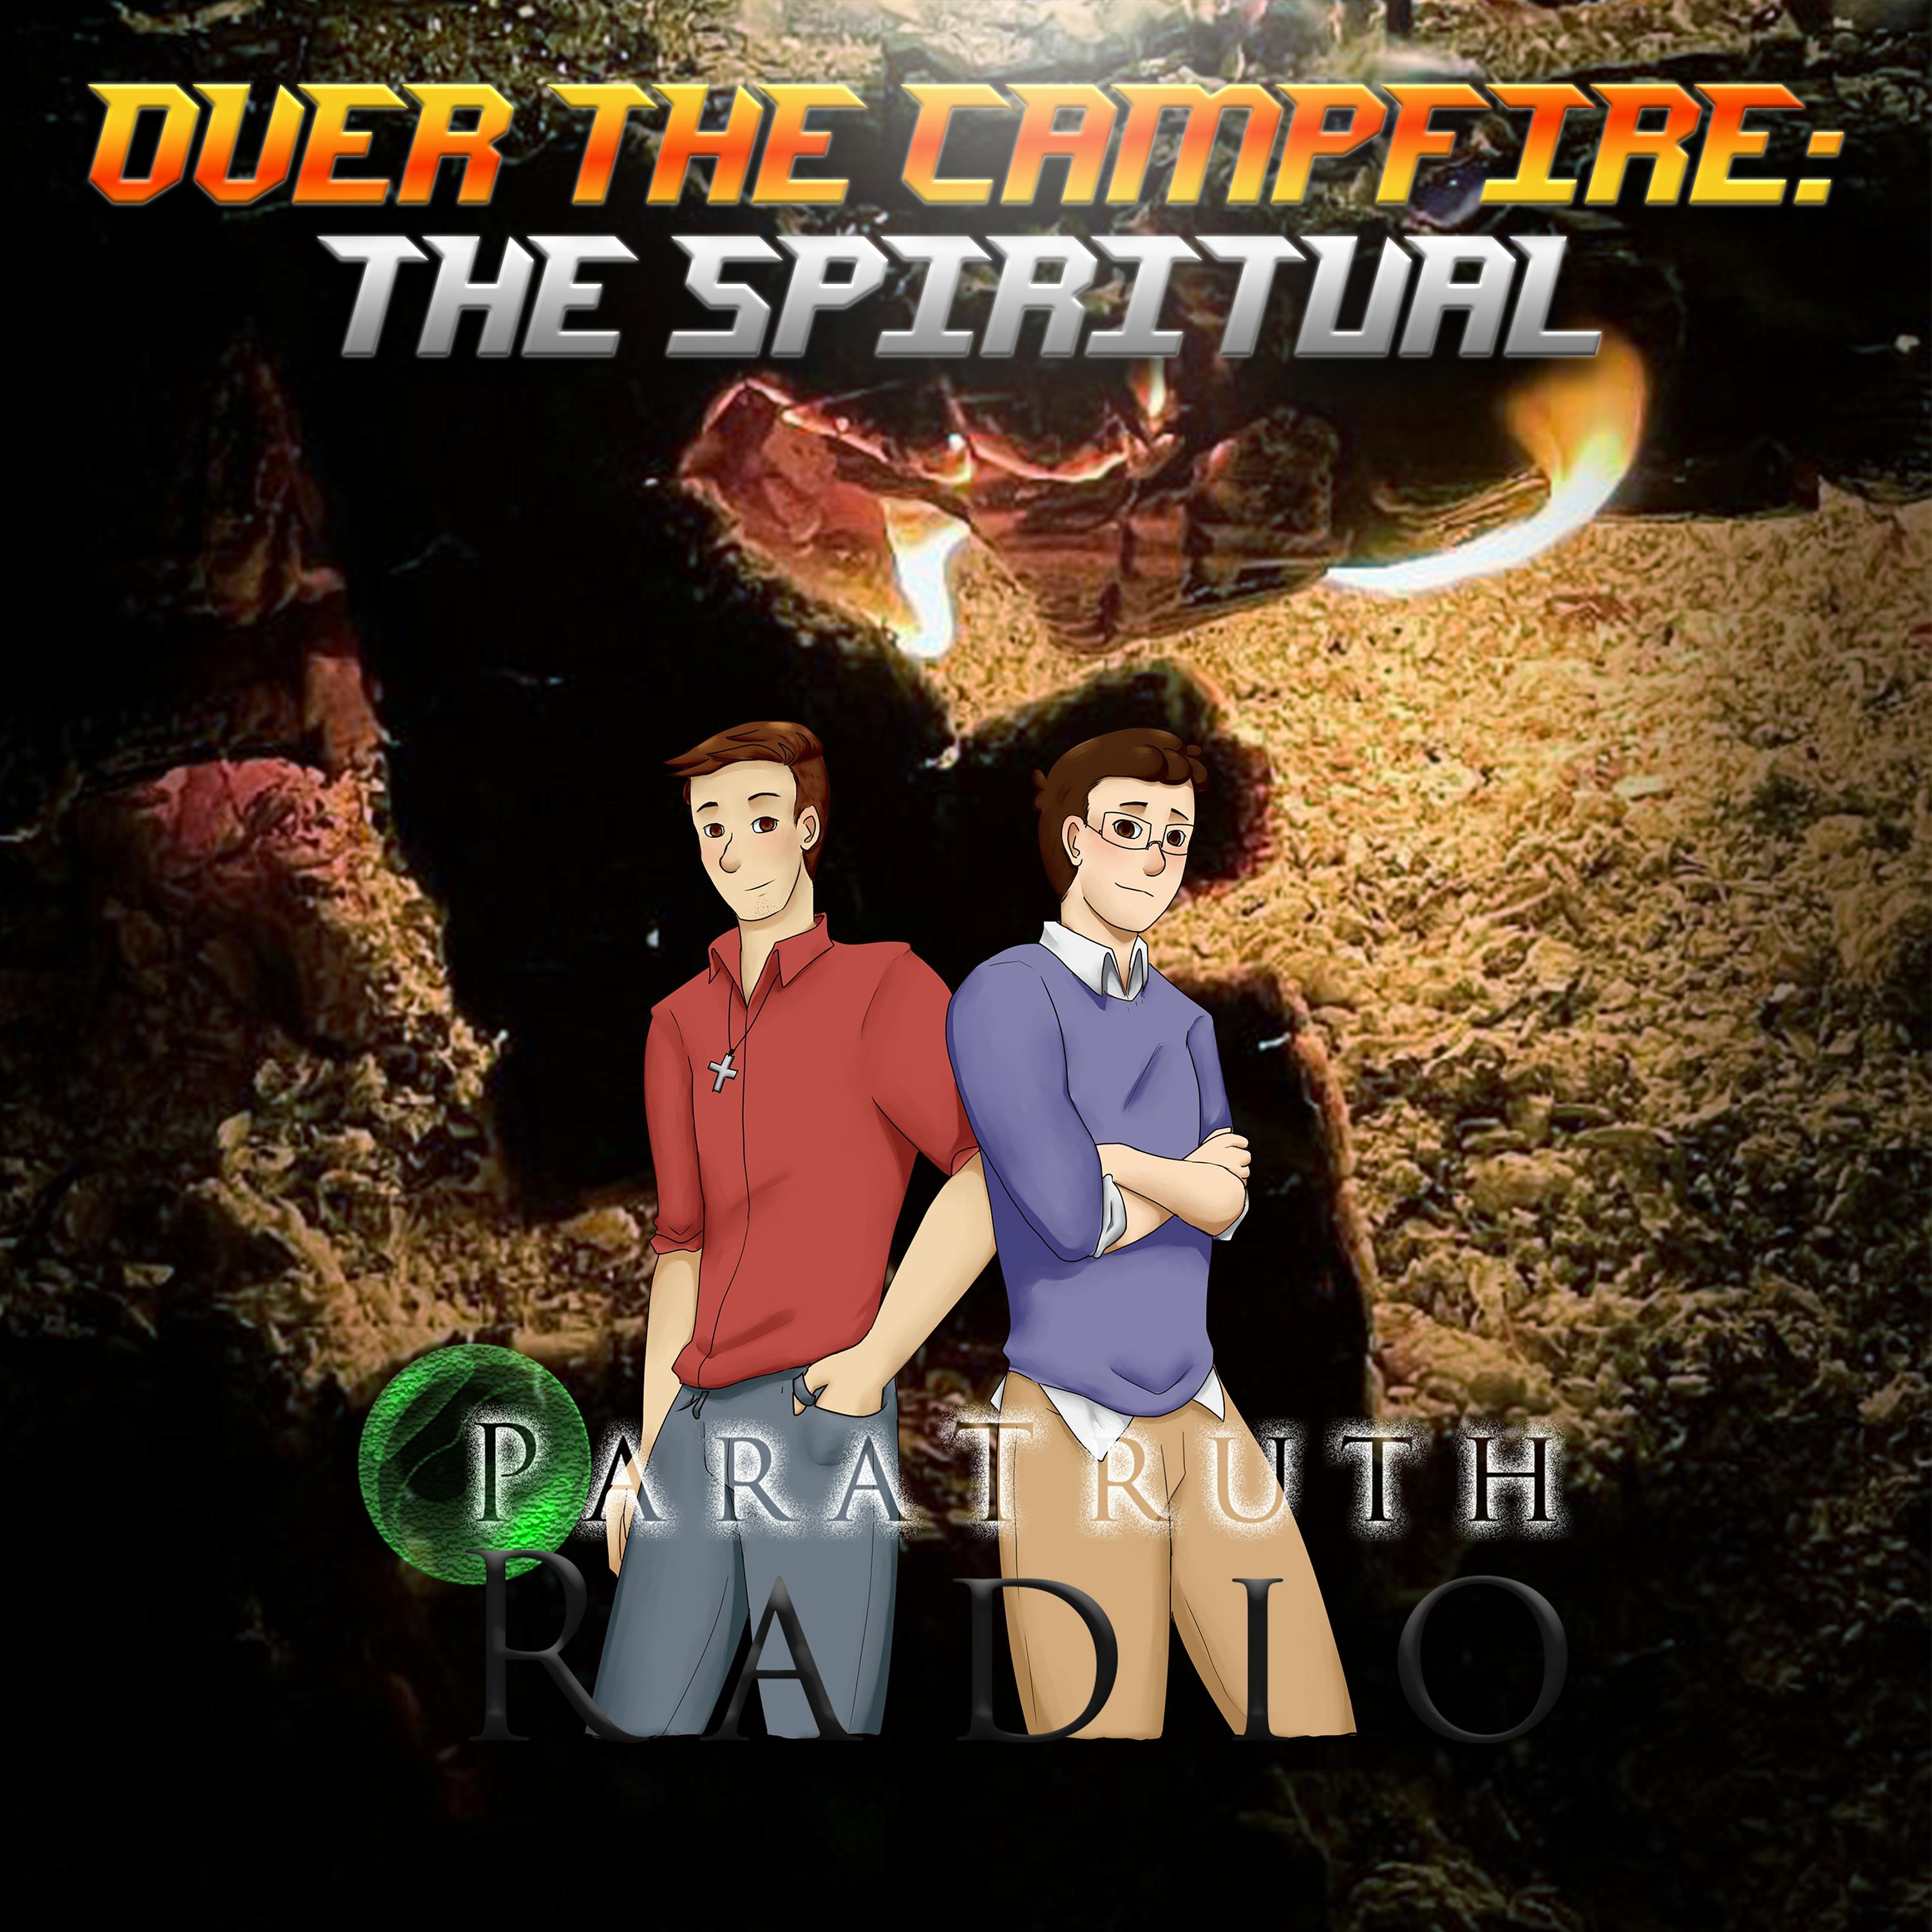 Over the Campfire: The Spiritual Image